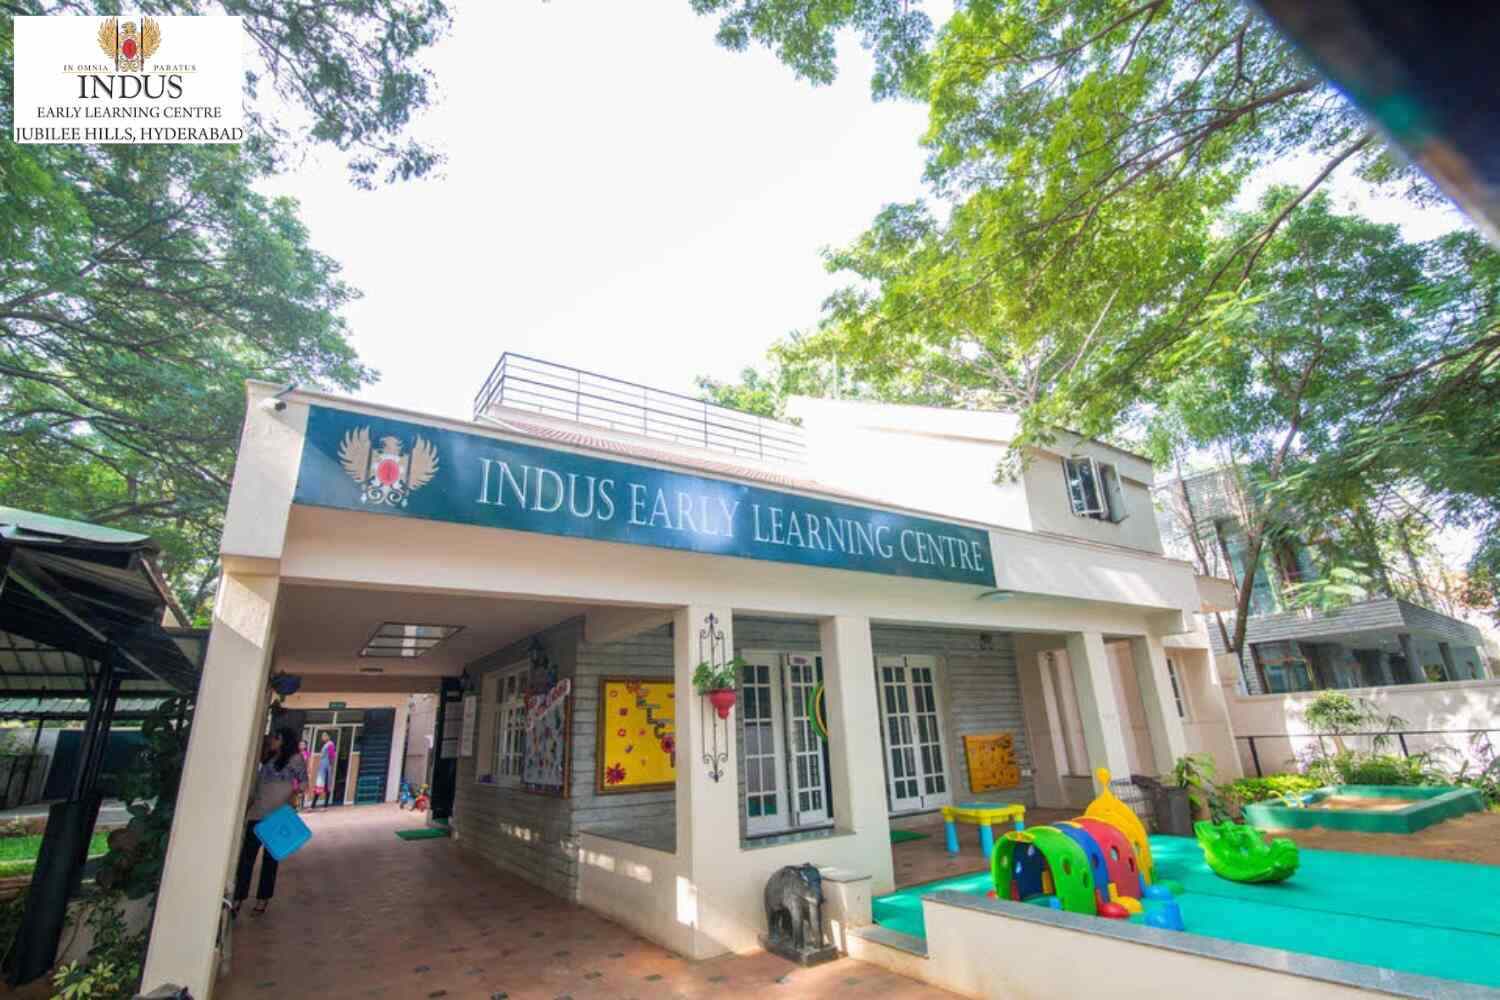 Indus Early Learning Centre (Jubilee Hills)